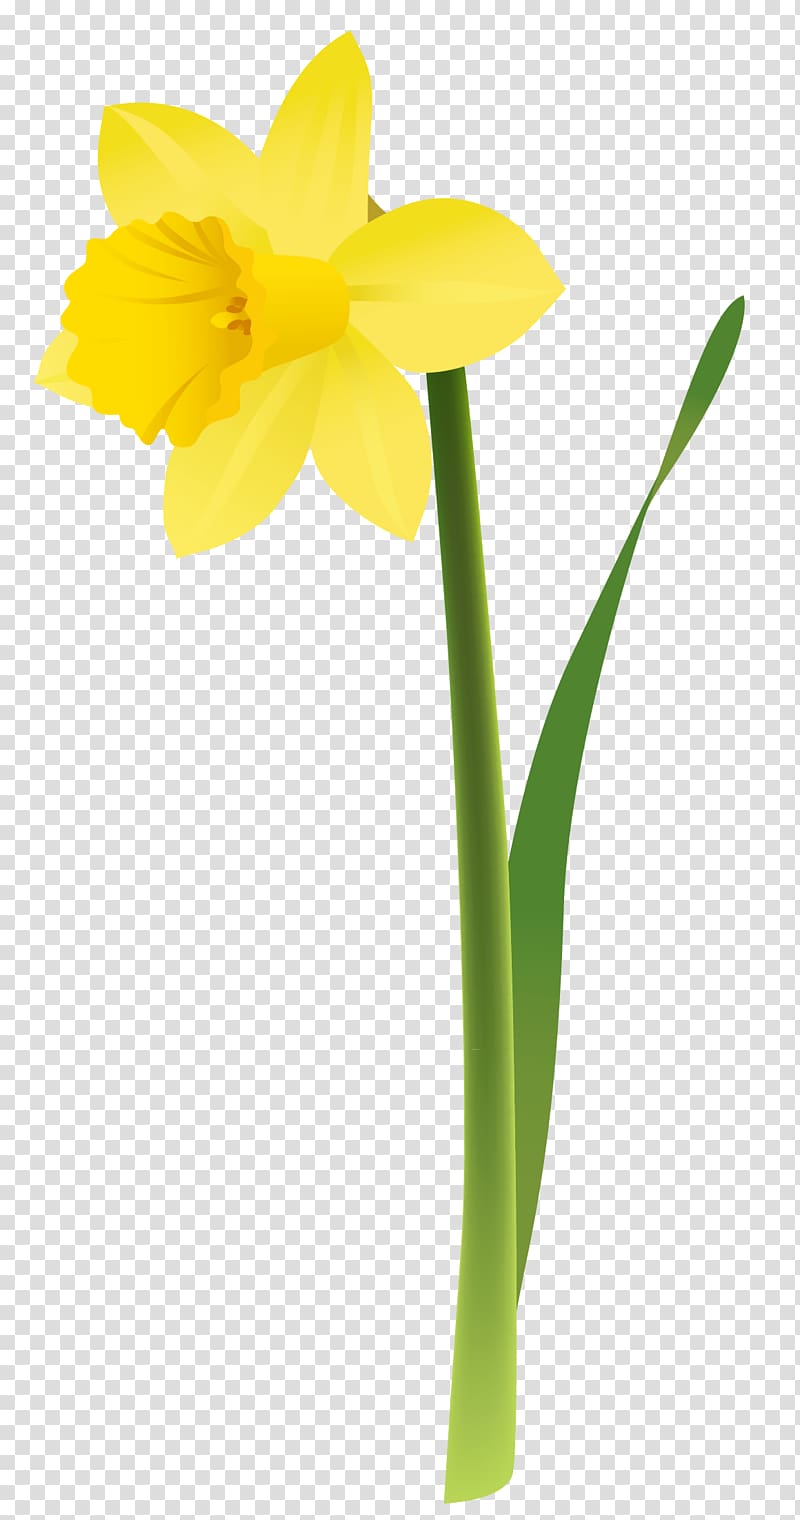 yellow daffodil flower illustration, Daffodil Floral design Cut flowers Yellow, Spring Yellow Daffodil transparent background PNG clipart